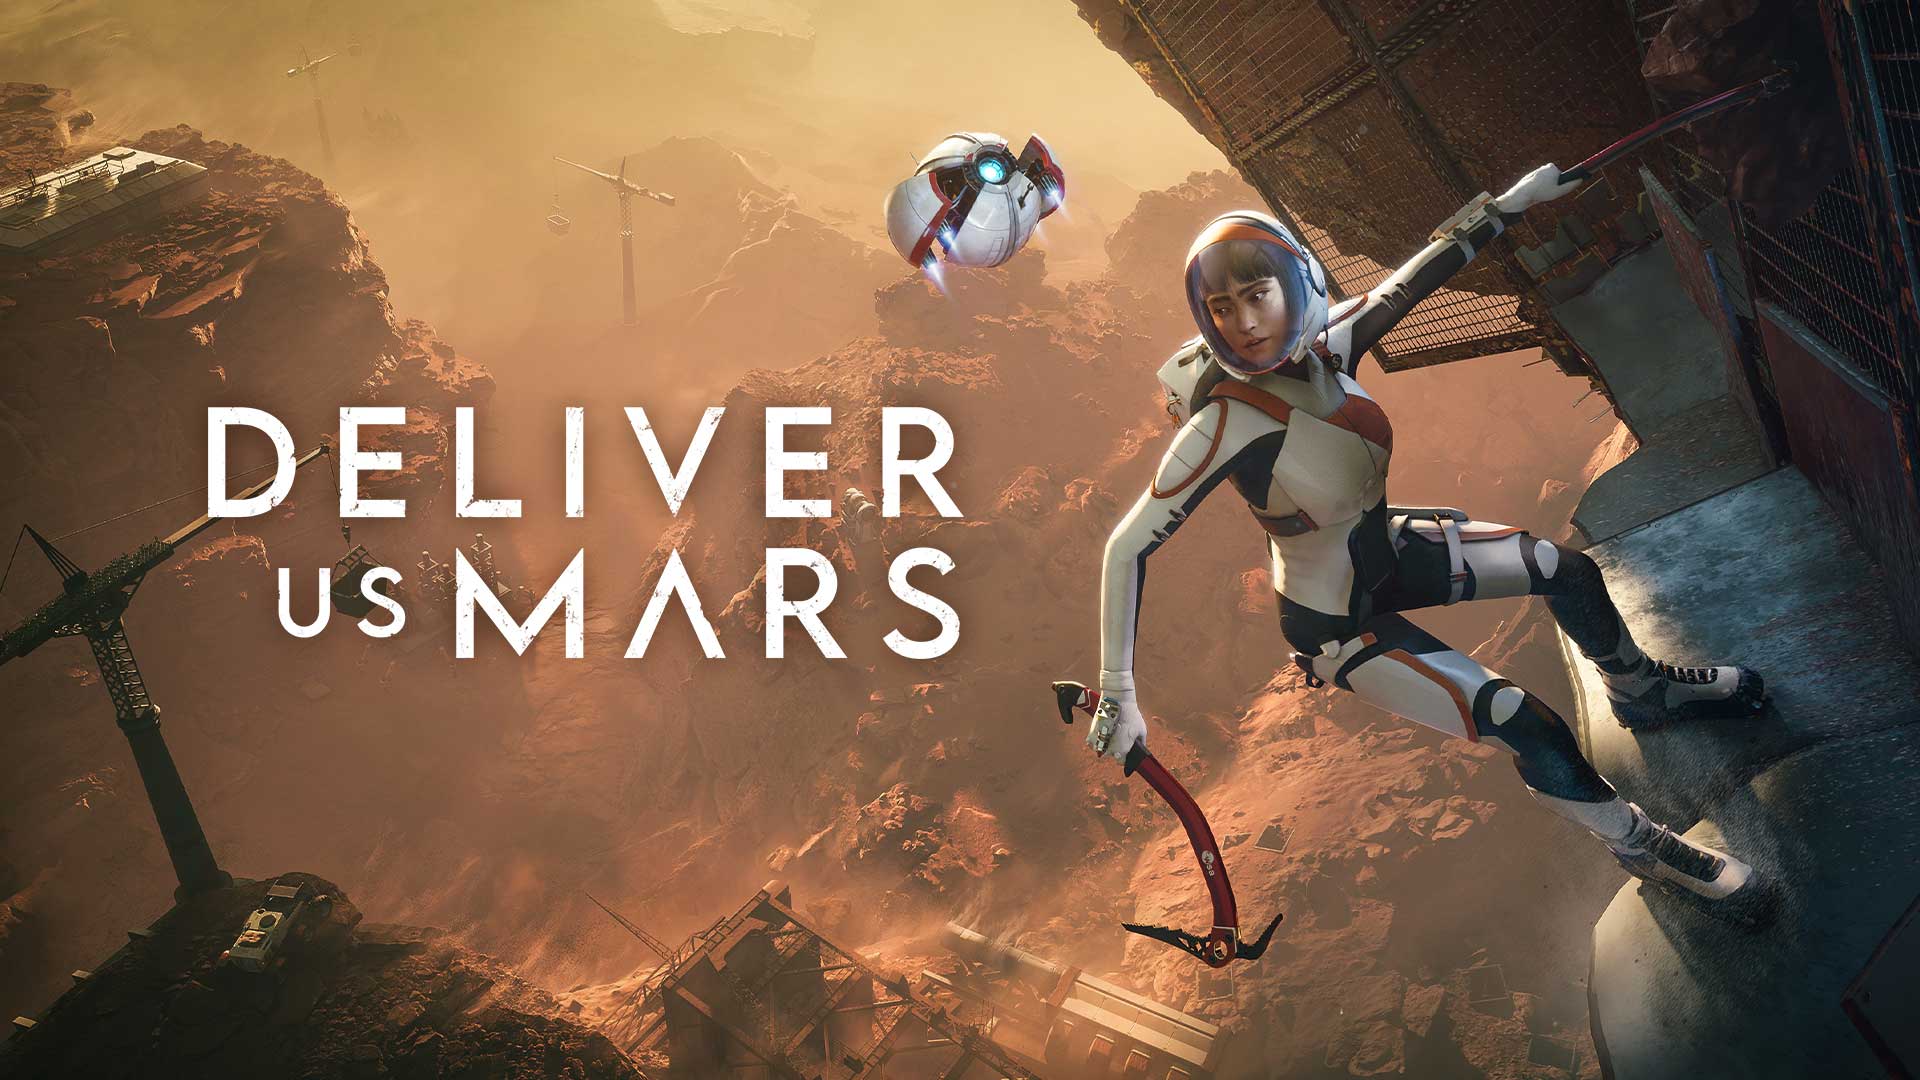 Sci-fi adventure game Deliver Us Mars is available now